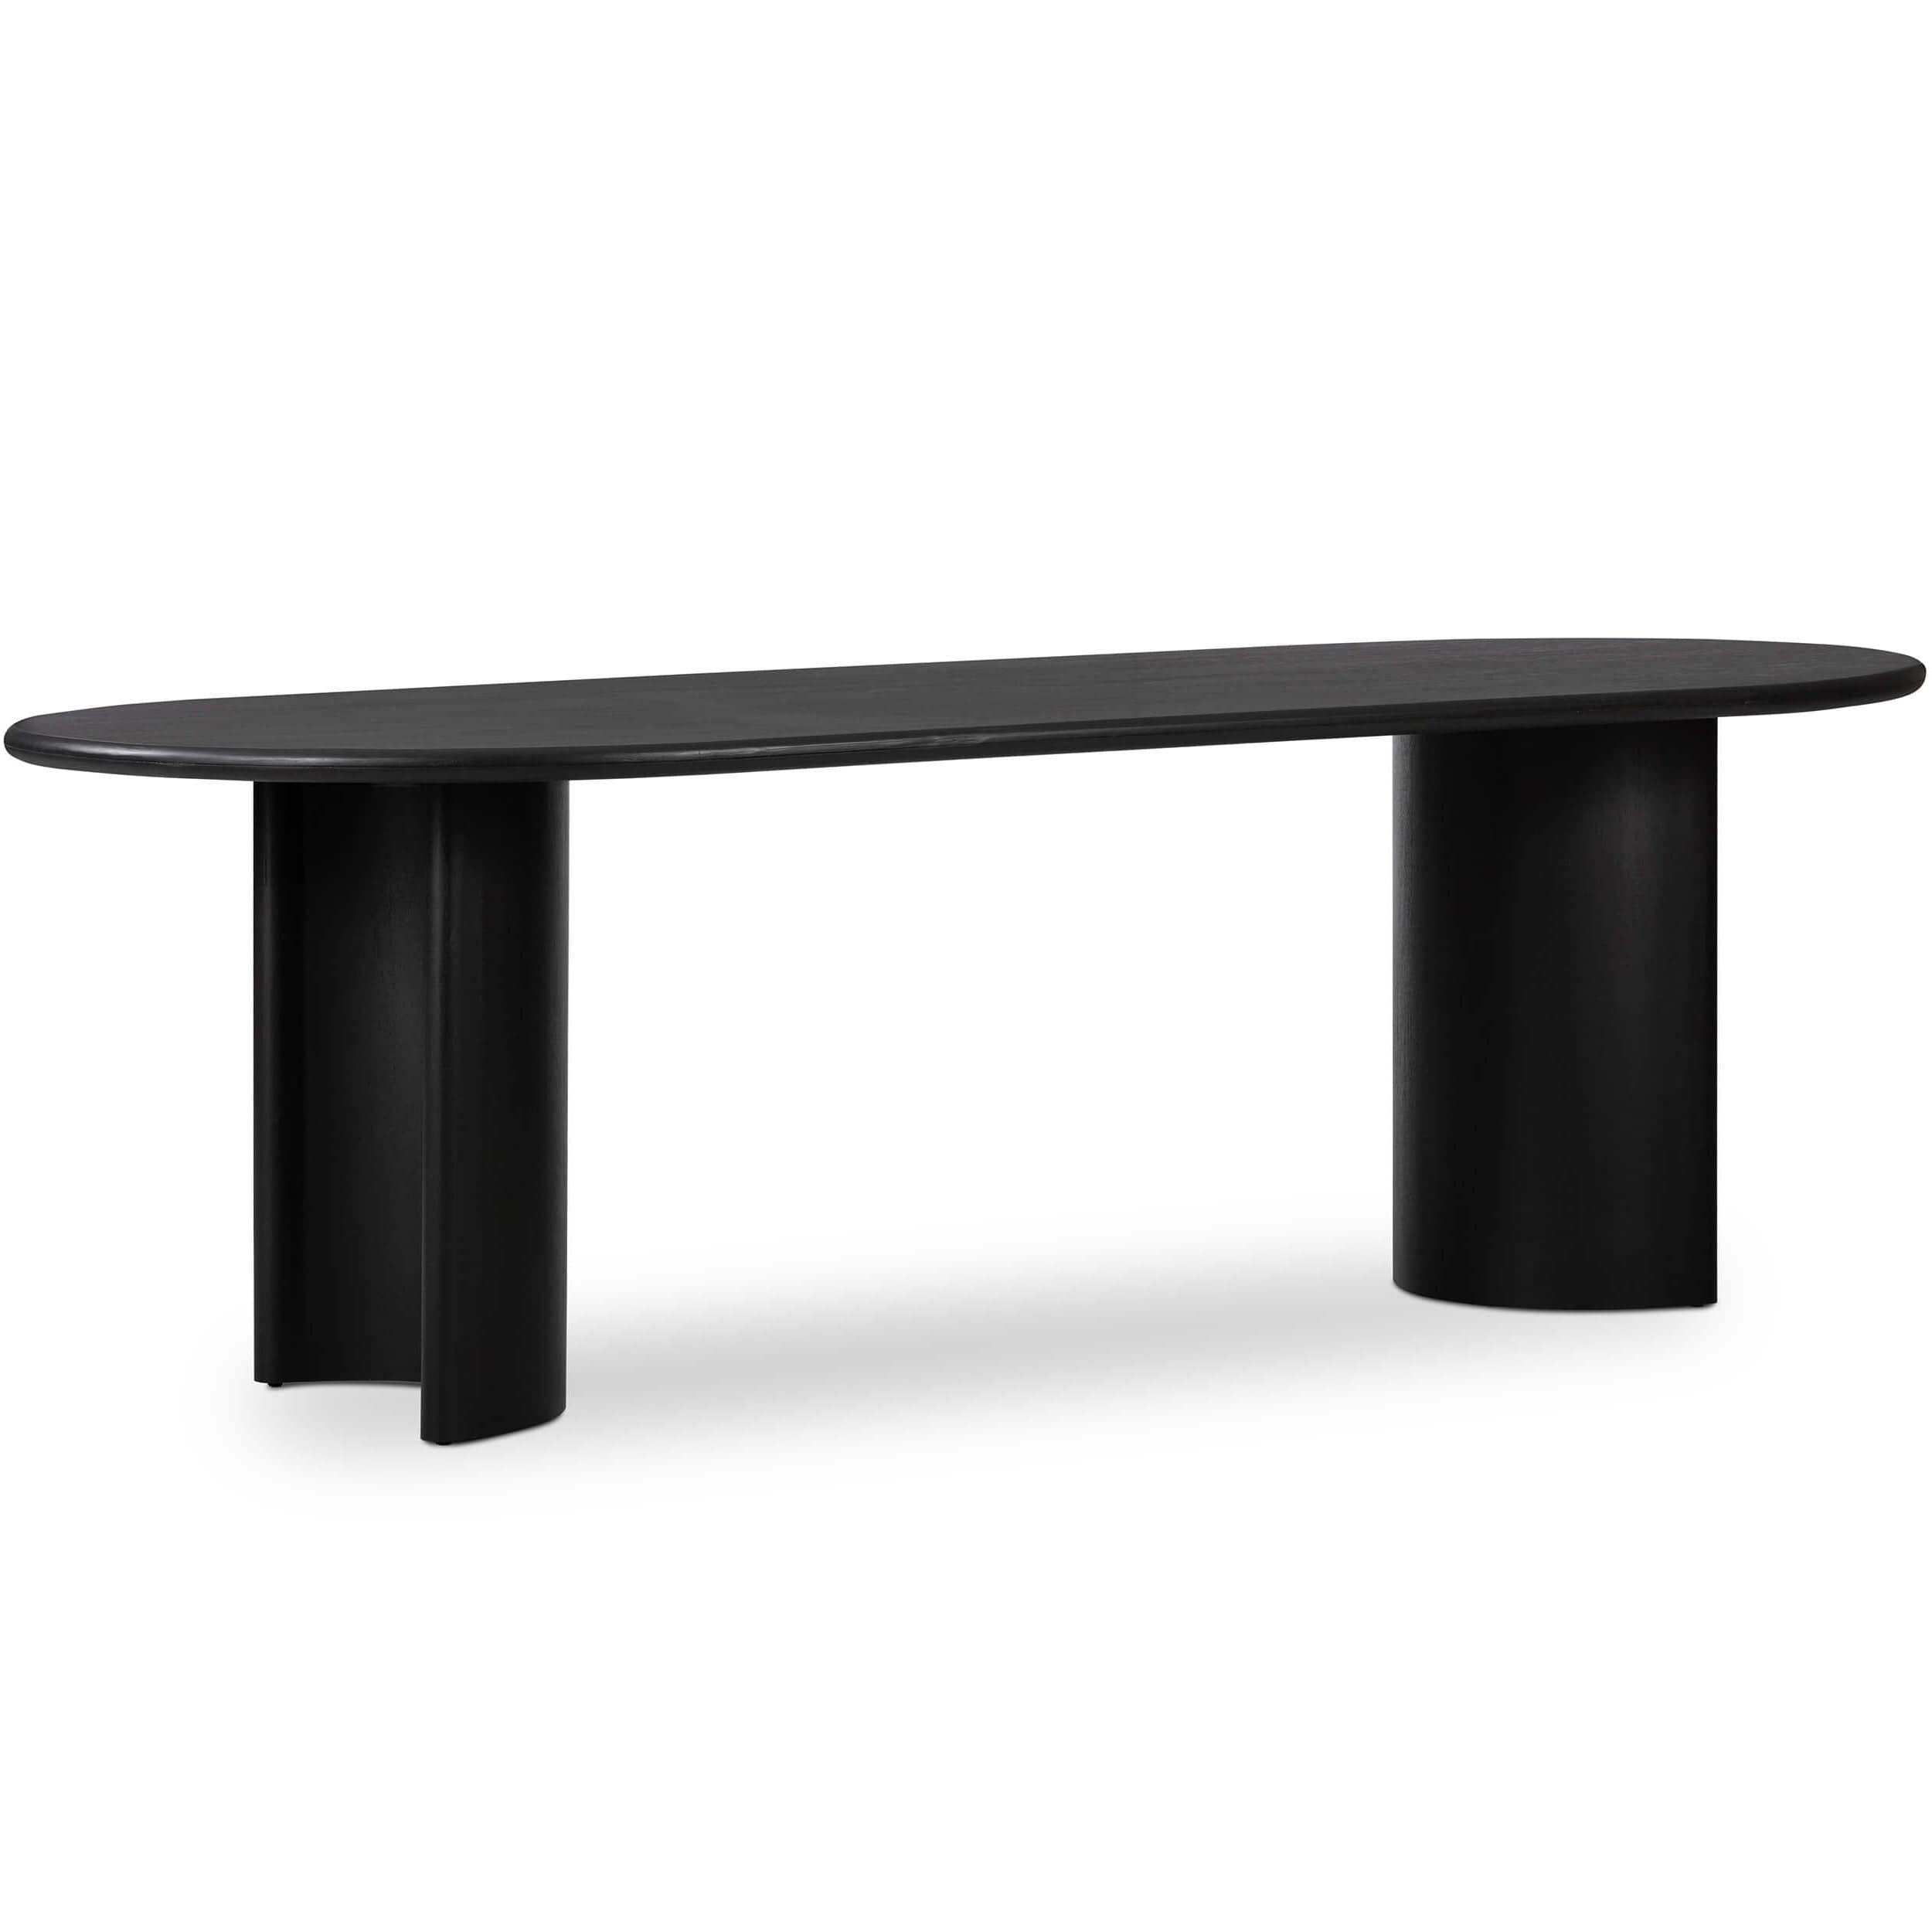 Image of Paden Dining Table, Aged Black